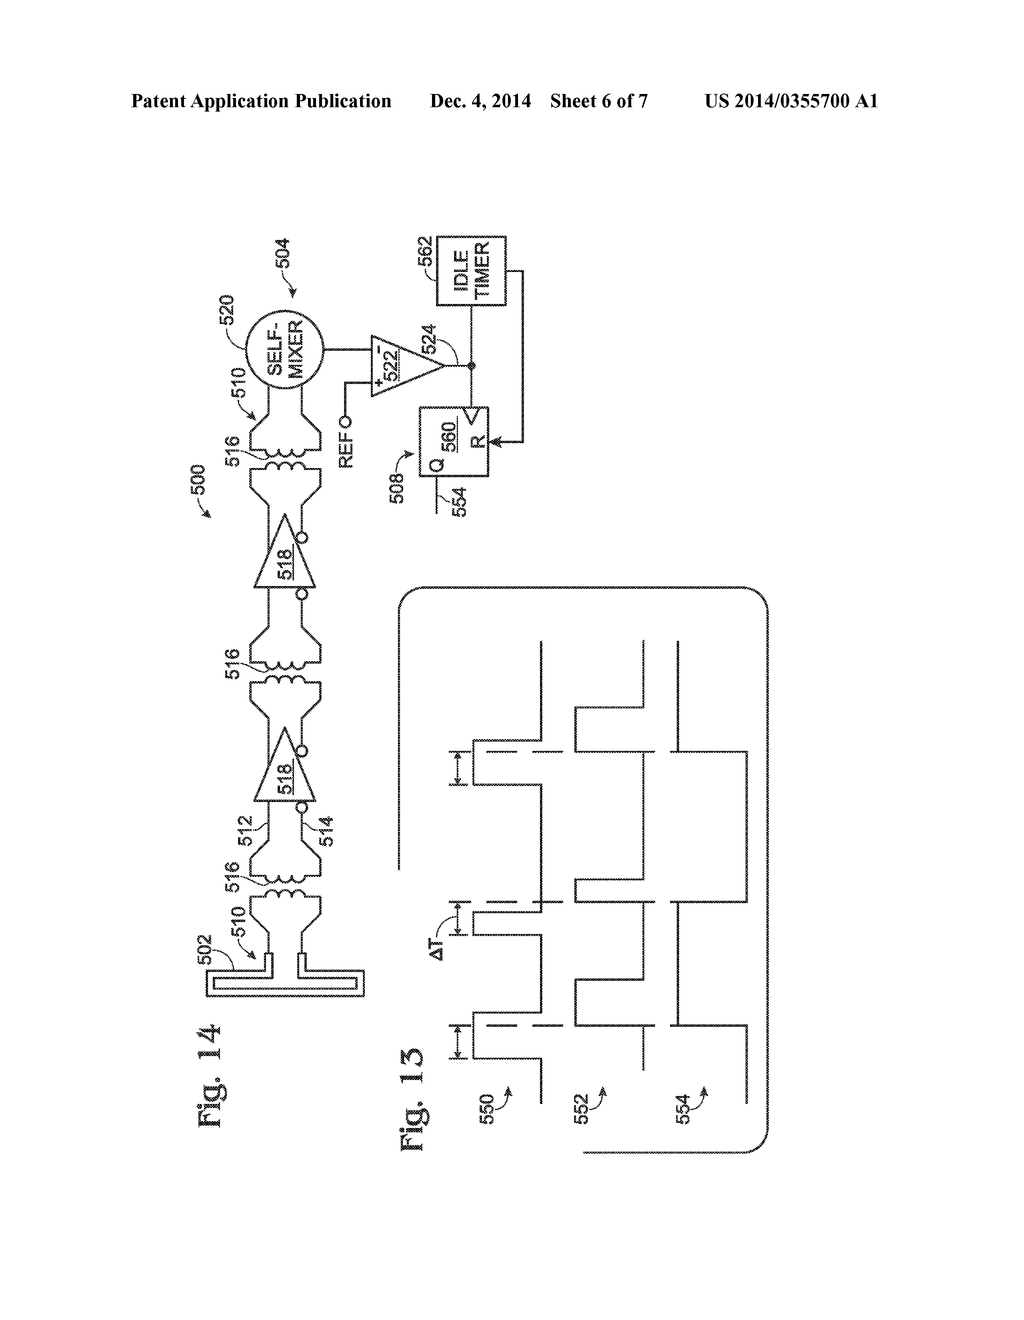 Delta  Modulated Low-Power EHF Communication Link - diagram, schematic, and image 07